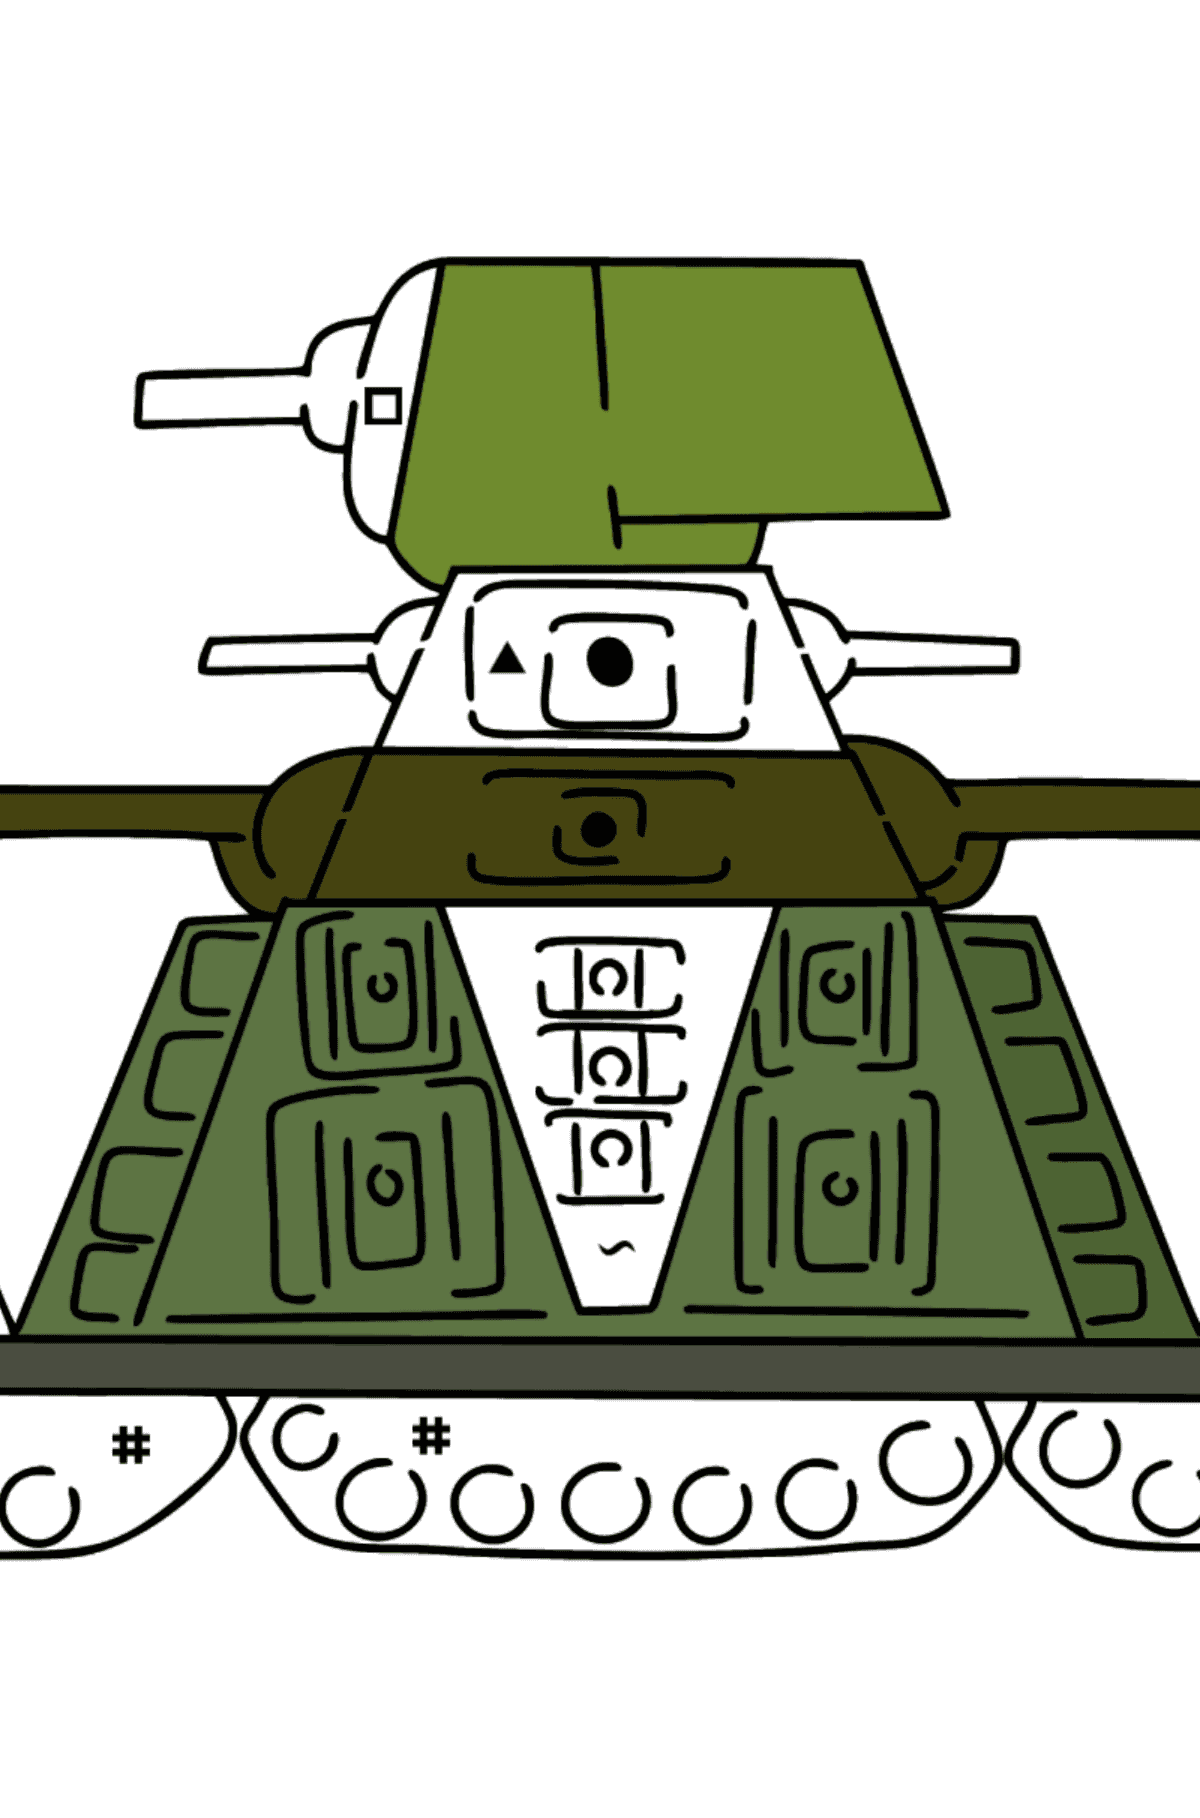 Tank KV 44 coloring page - Coloring by Symbols for Kids